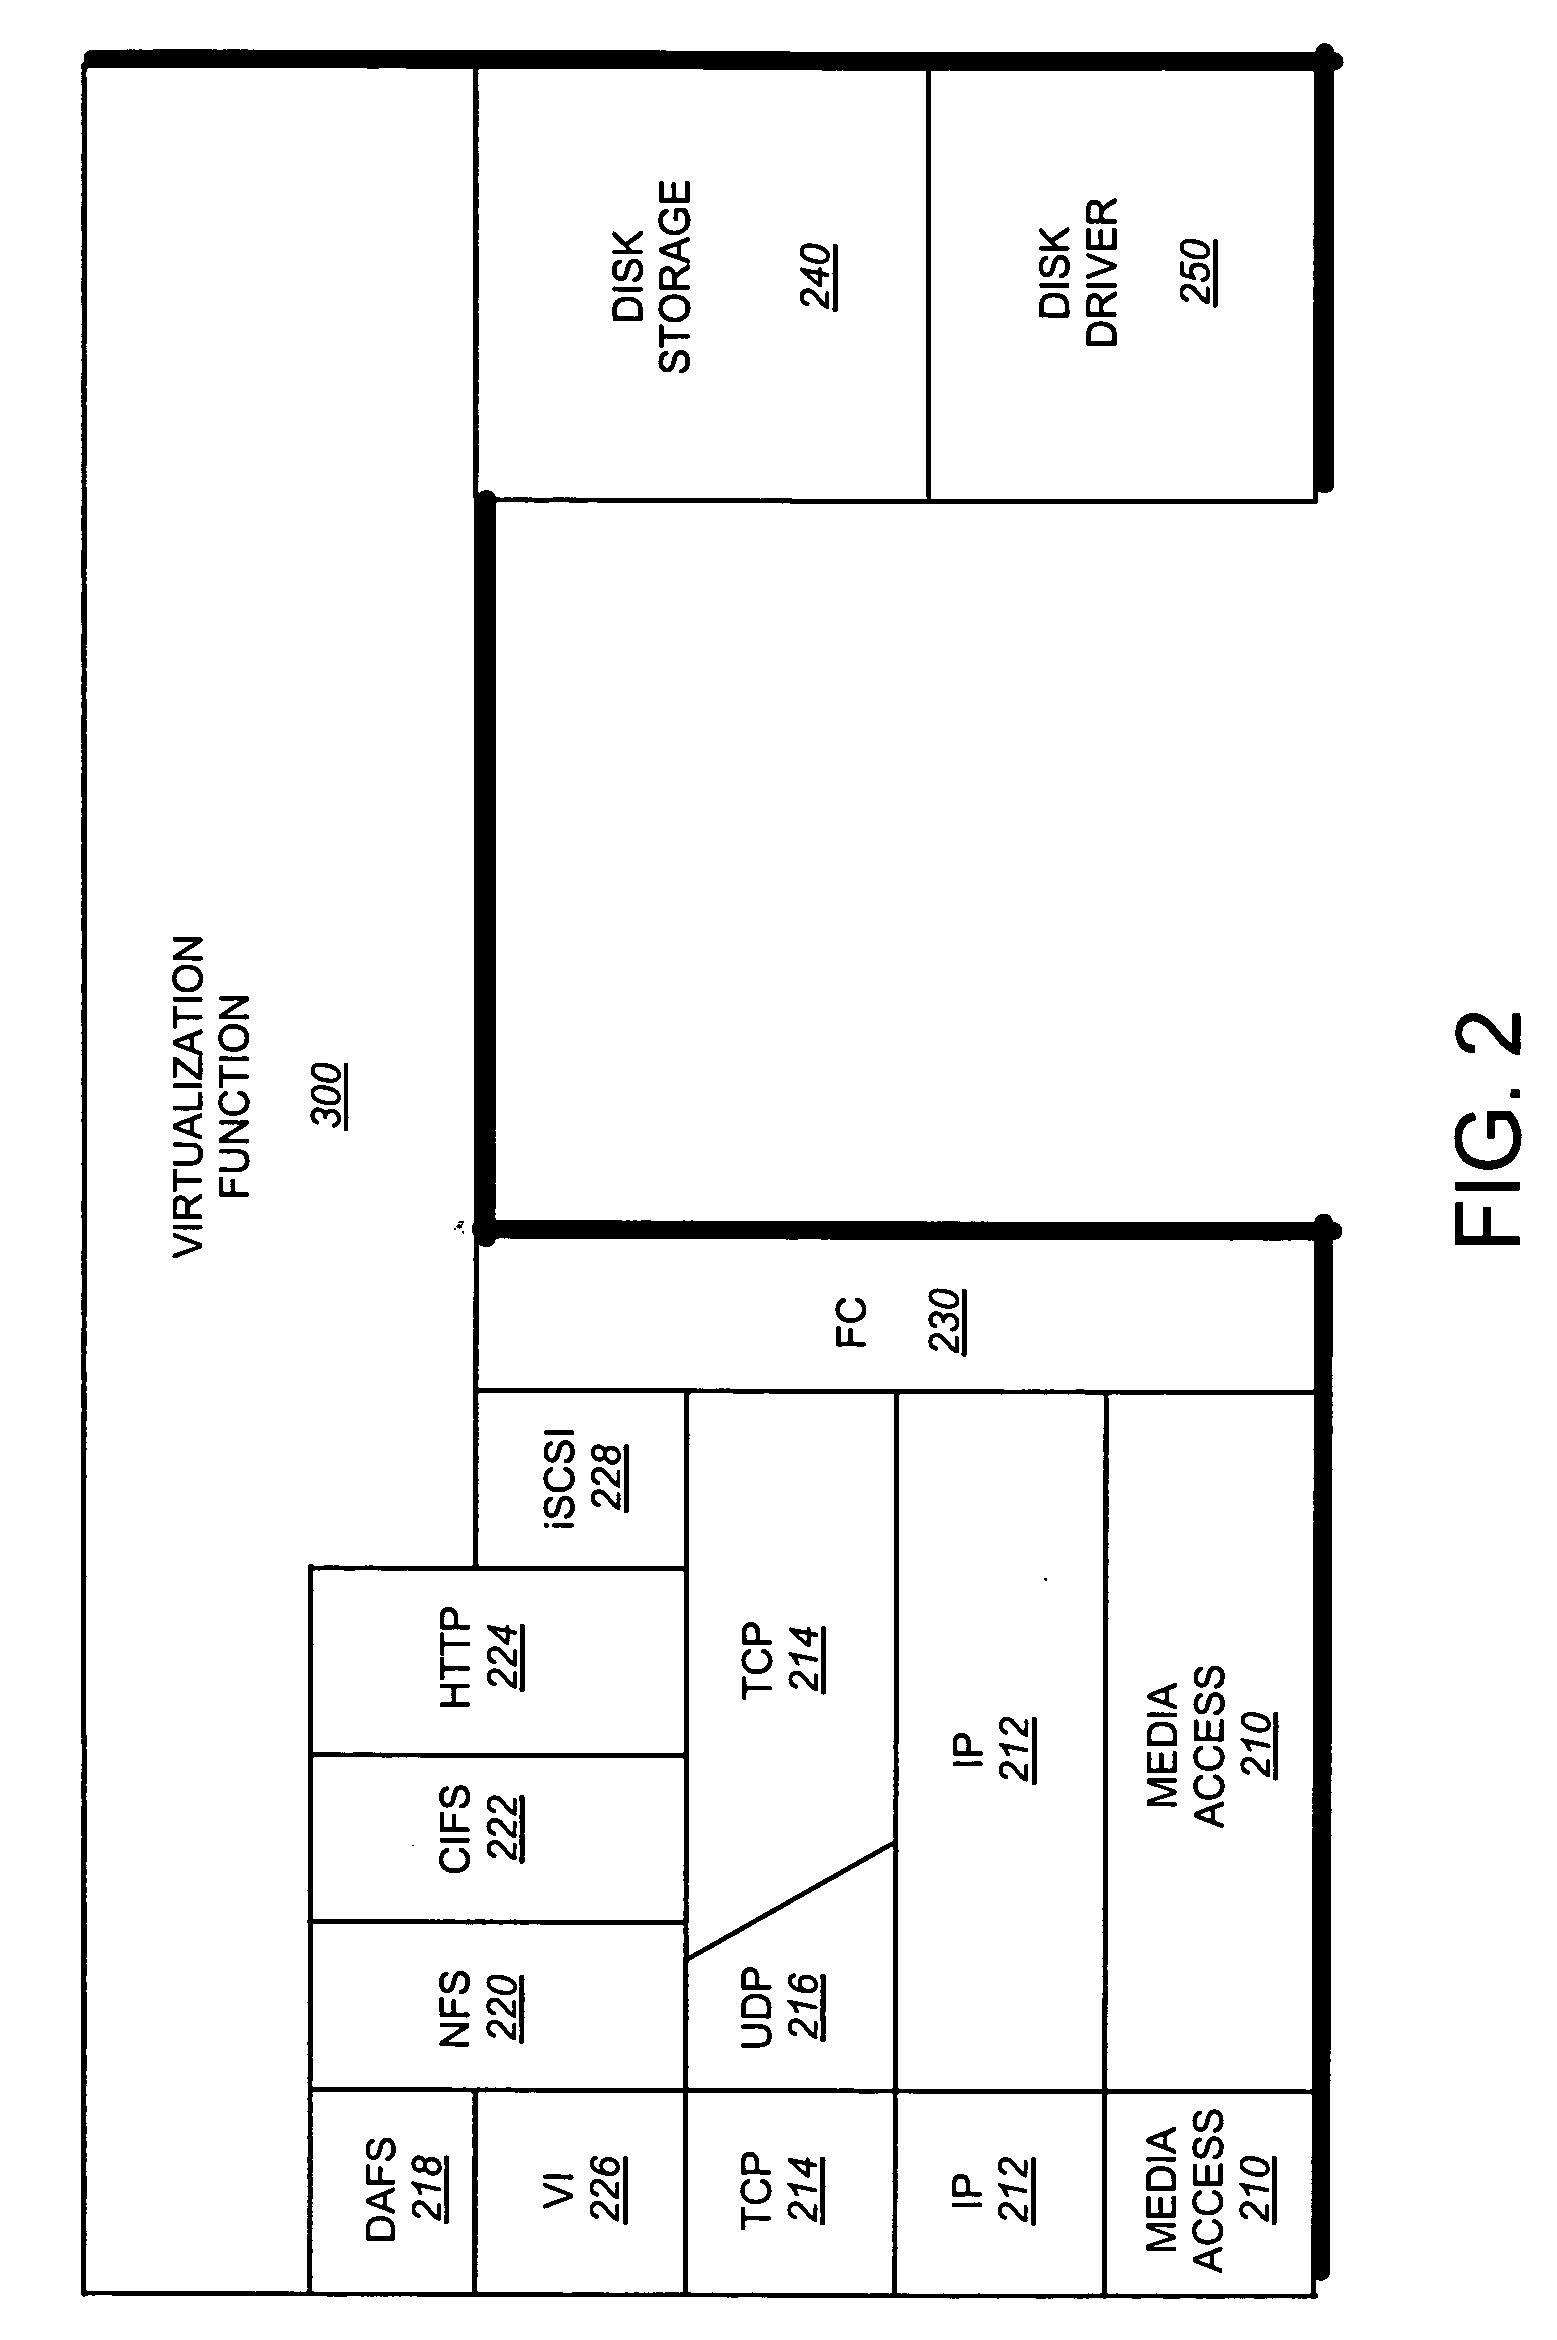 System and method for supporting block-based protocols on a virtual storage appliance executing within a physical storage appliance